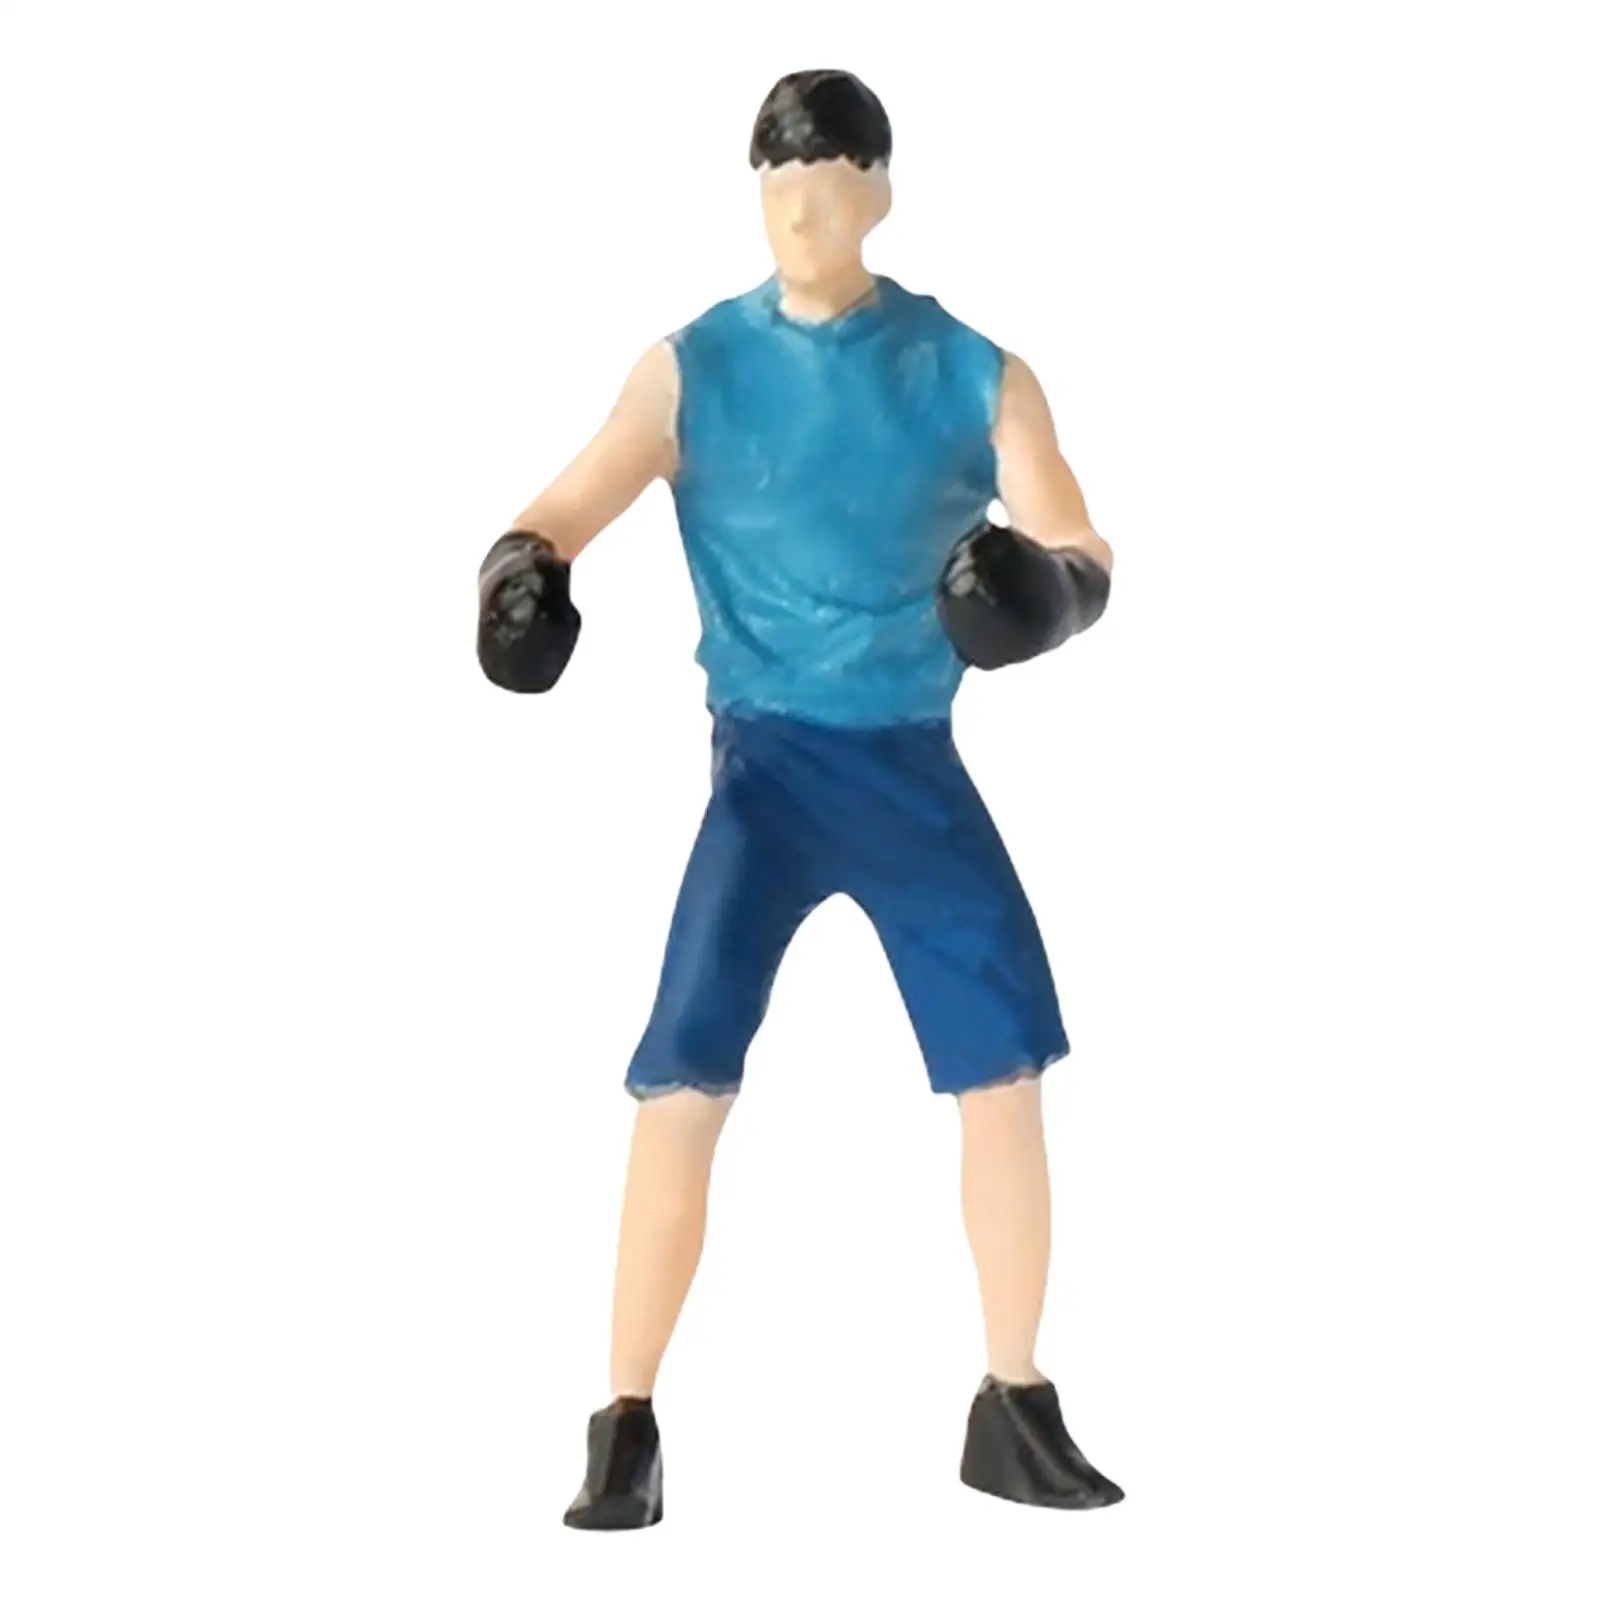 Realistic 1:64 Figures Boxing Man Figurines Ornament Tiny People for Dollhouse Layout